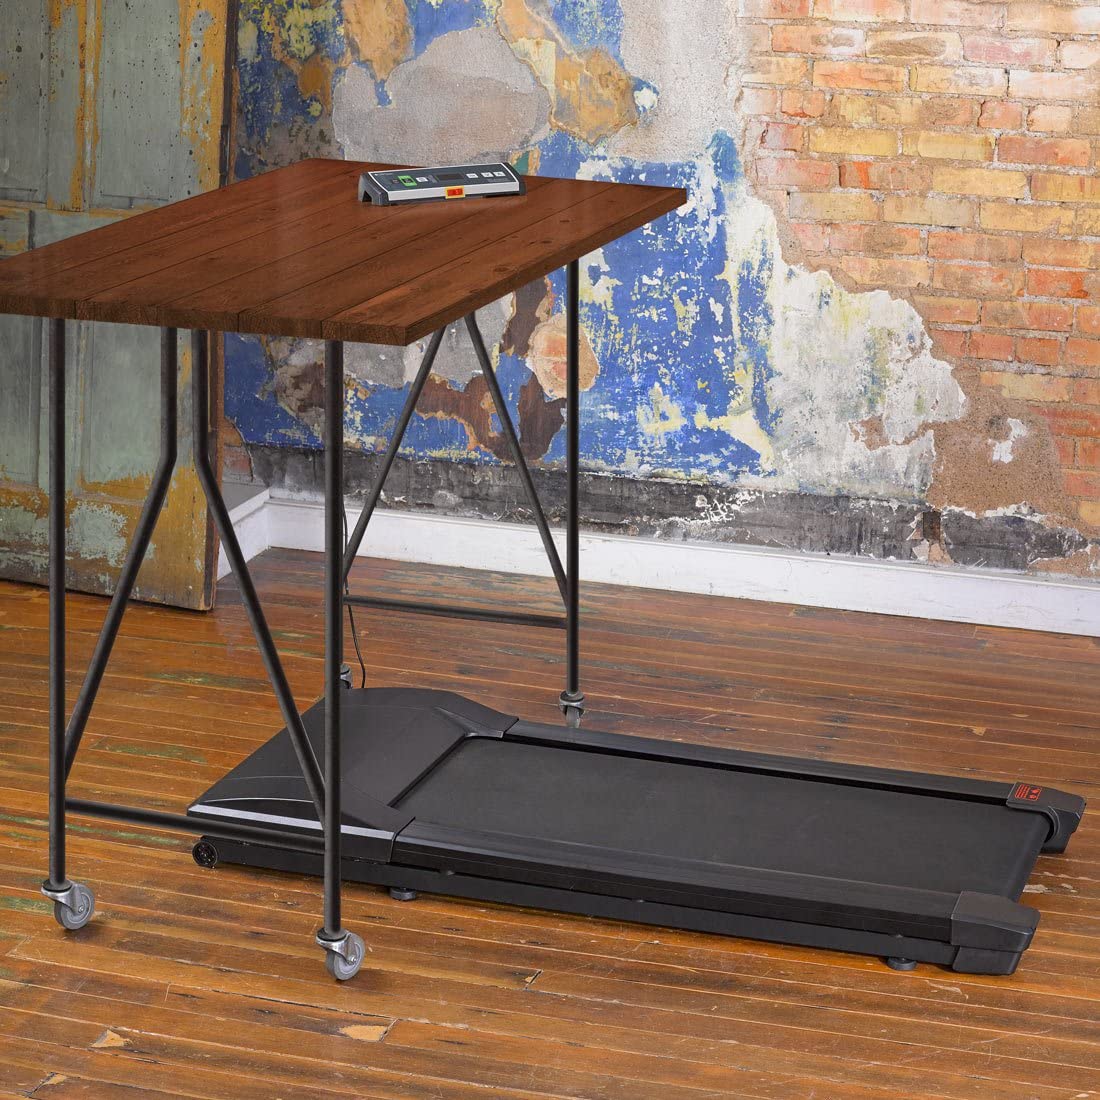 LifeSpan Portable Walking Under Desk Treadmill for Standing Desk Workout - image 4 of 6